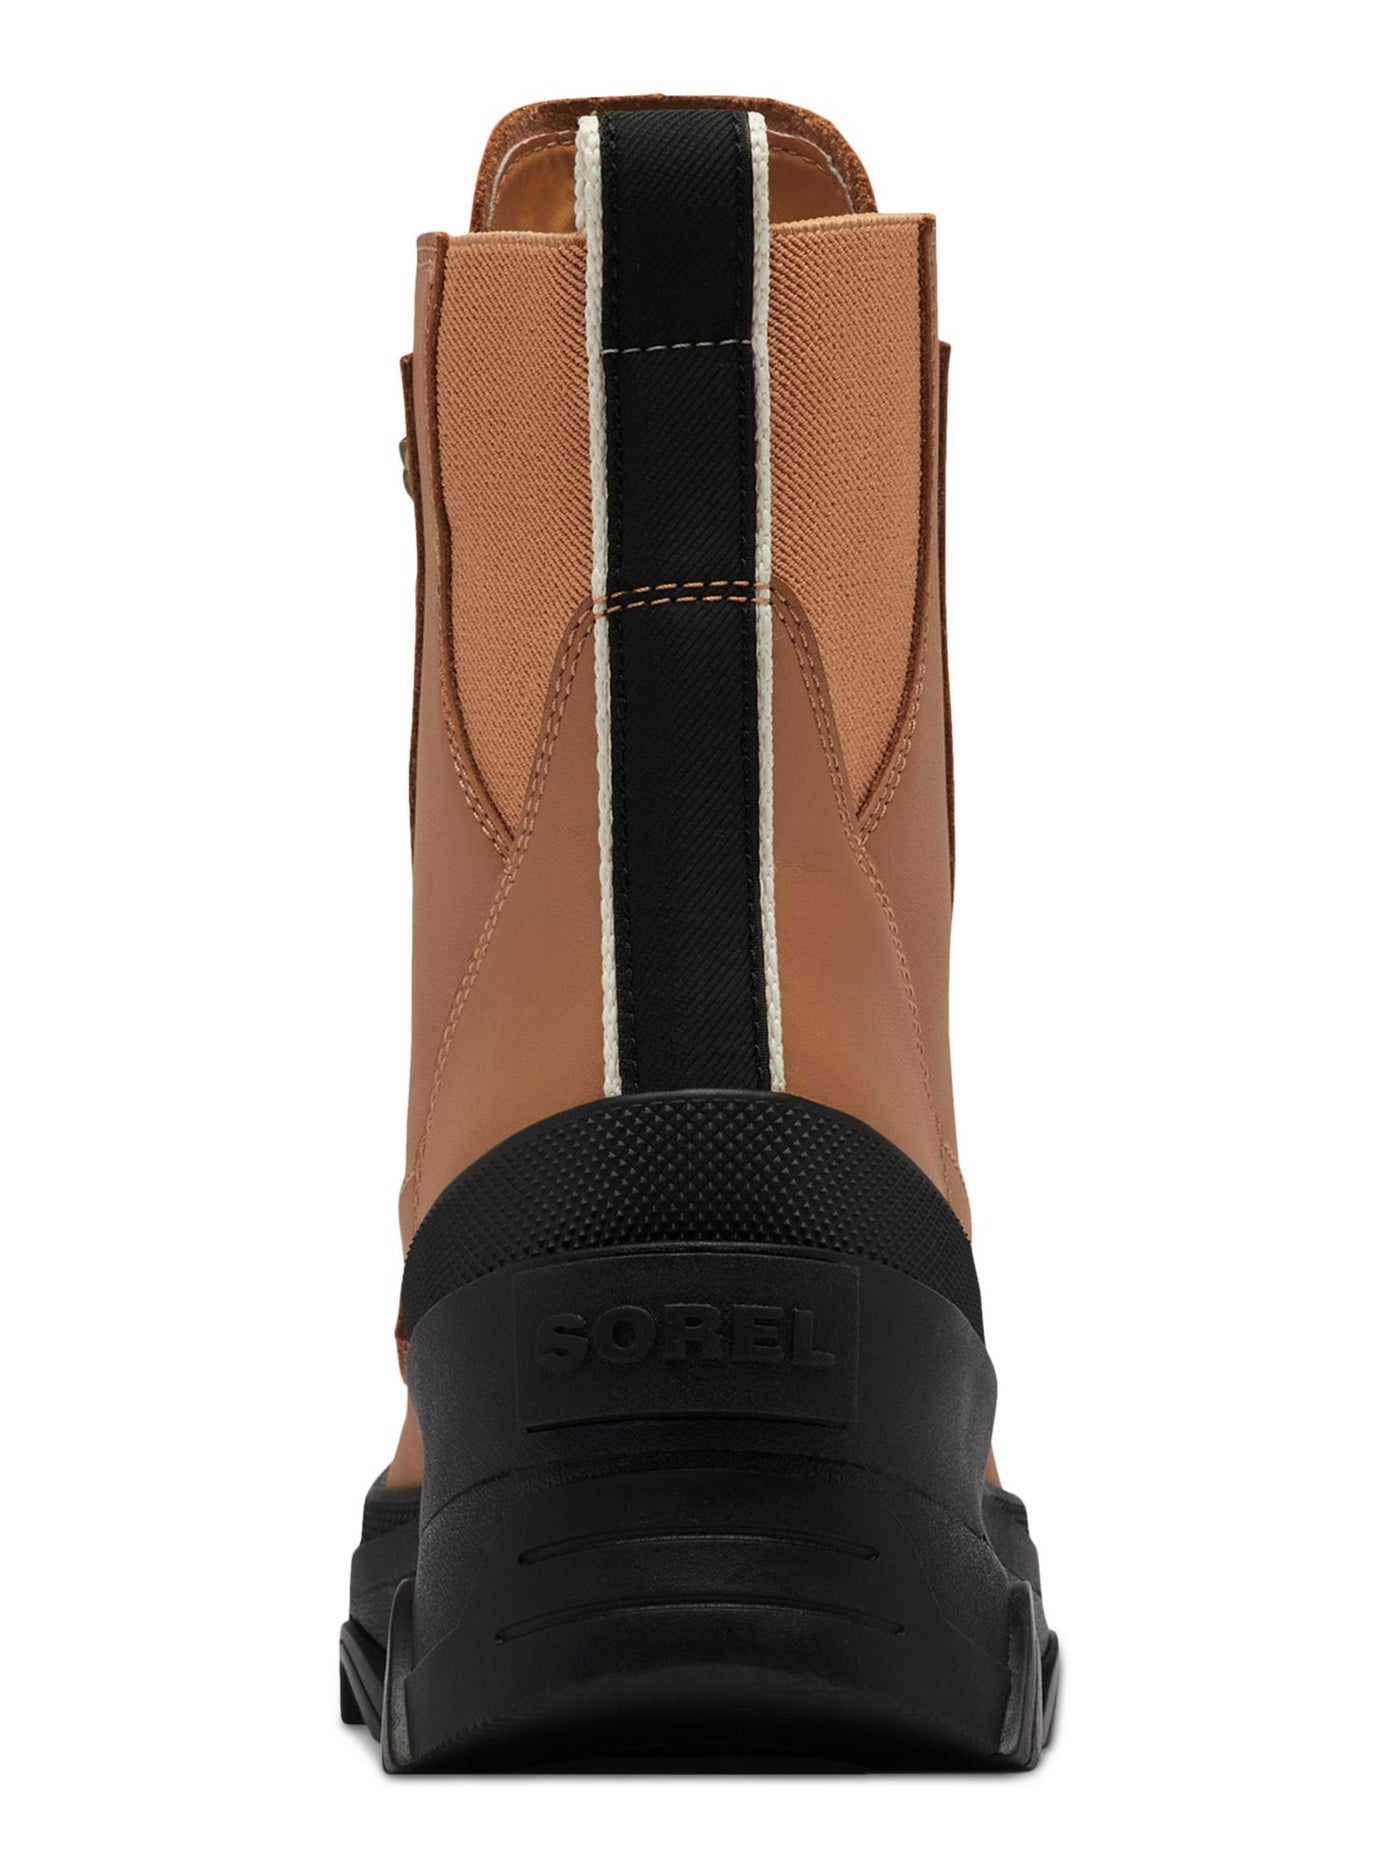 SOREL Womens Beige Mixed Media 1-1/2" Platform Waterproof Padded Removable Insole Back Pull-Tab Arch Support Slip Resistant Brex Round Toe Block Heel Lace-Up Leather Boots Shoes 11